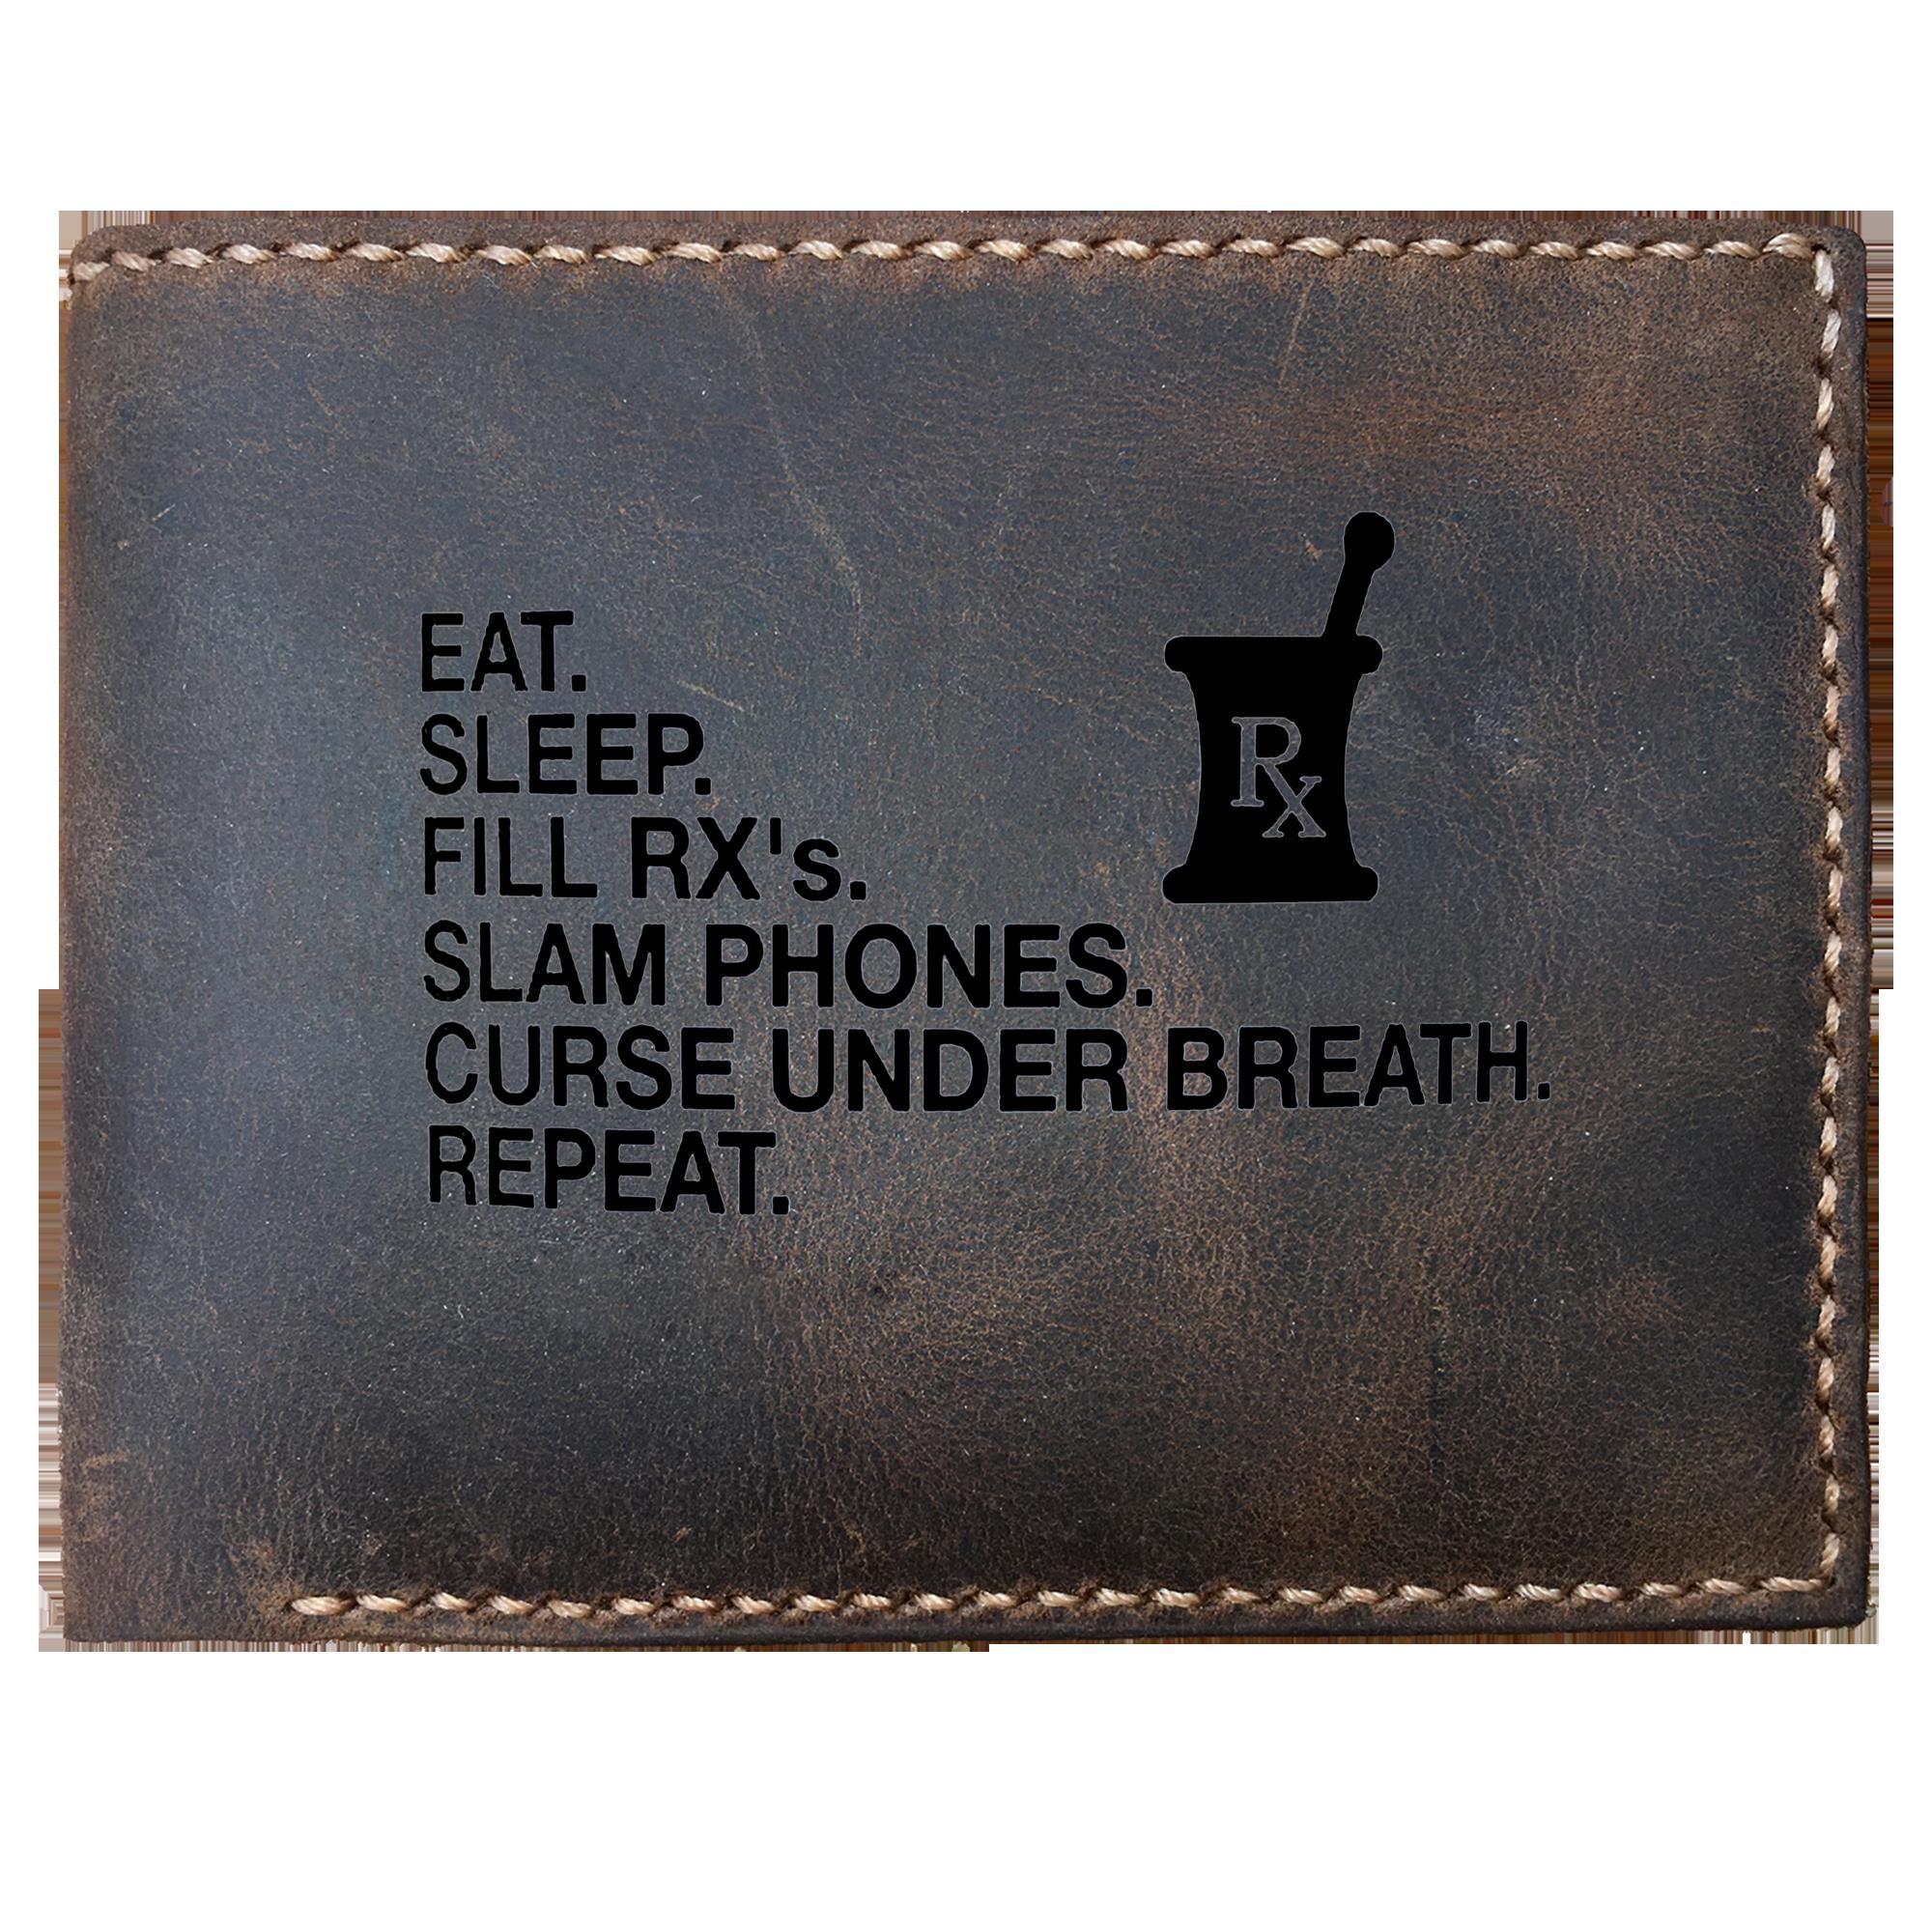 Skitongifts Funny Custom Engraved Bifold Leather Wallet, Pharmacy Technician Funny Eat. Sleep. Fill Rx's. Slam Phones. Curse Under Breath. Repeat